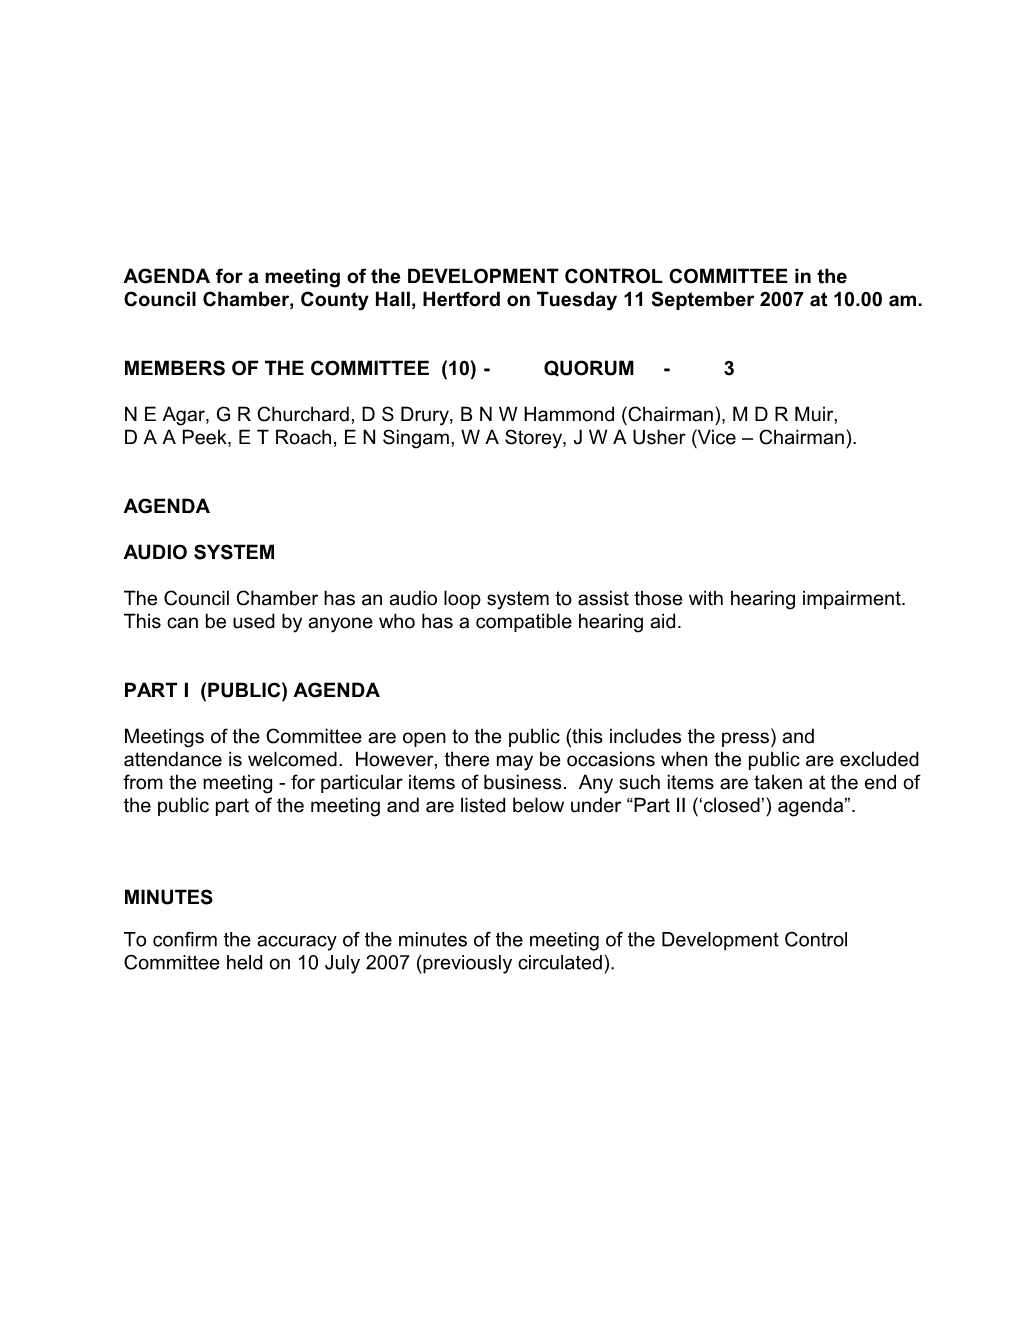 AGENDA for a Meeting of the DEVELOPMENT CONTROL COMMITTEE in The